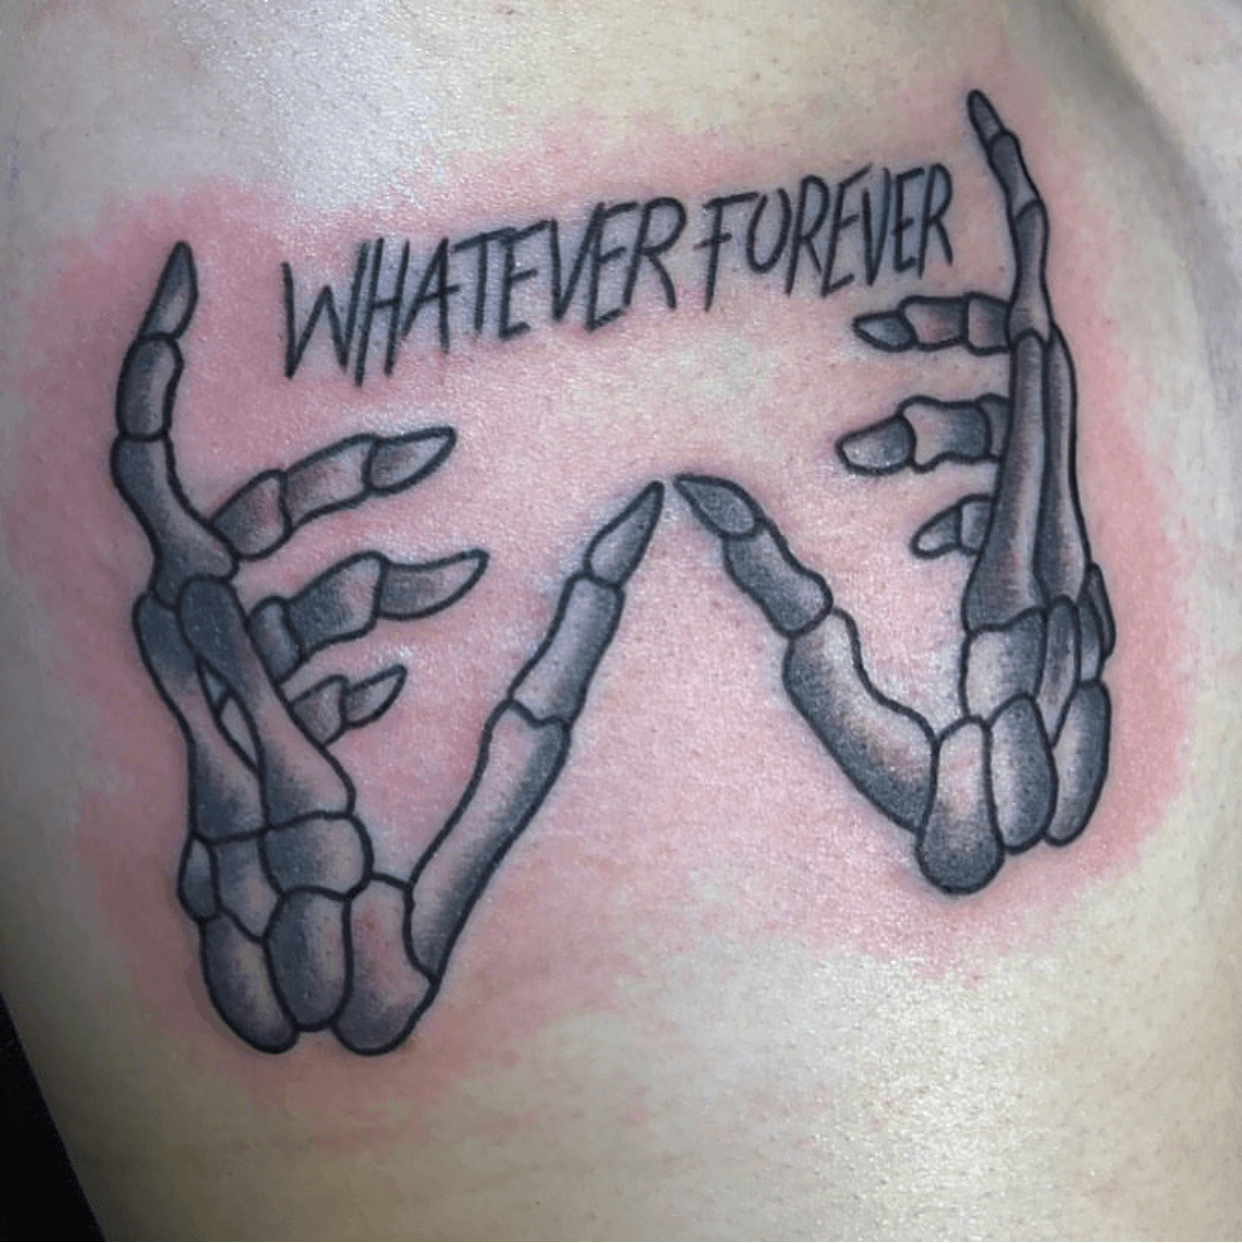 Tattoo of the word whatever handwritten on the upper